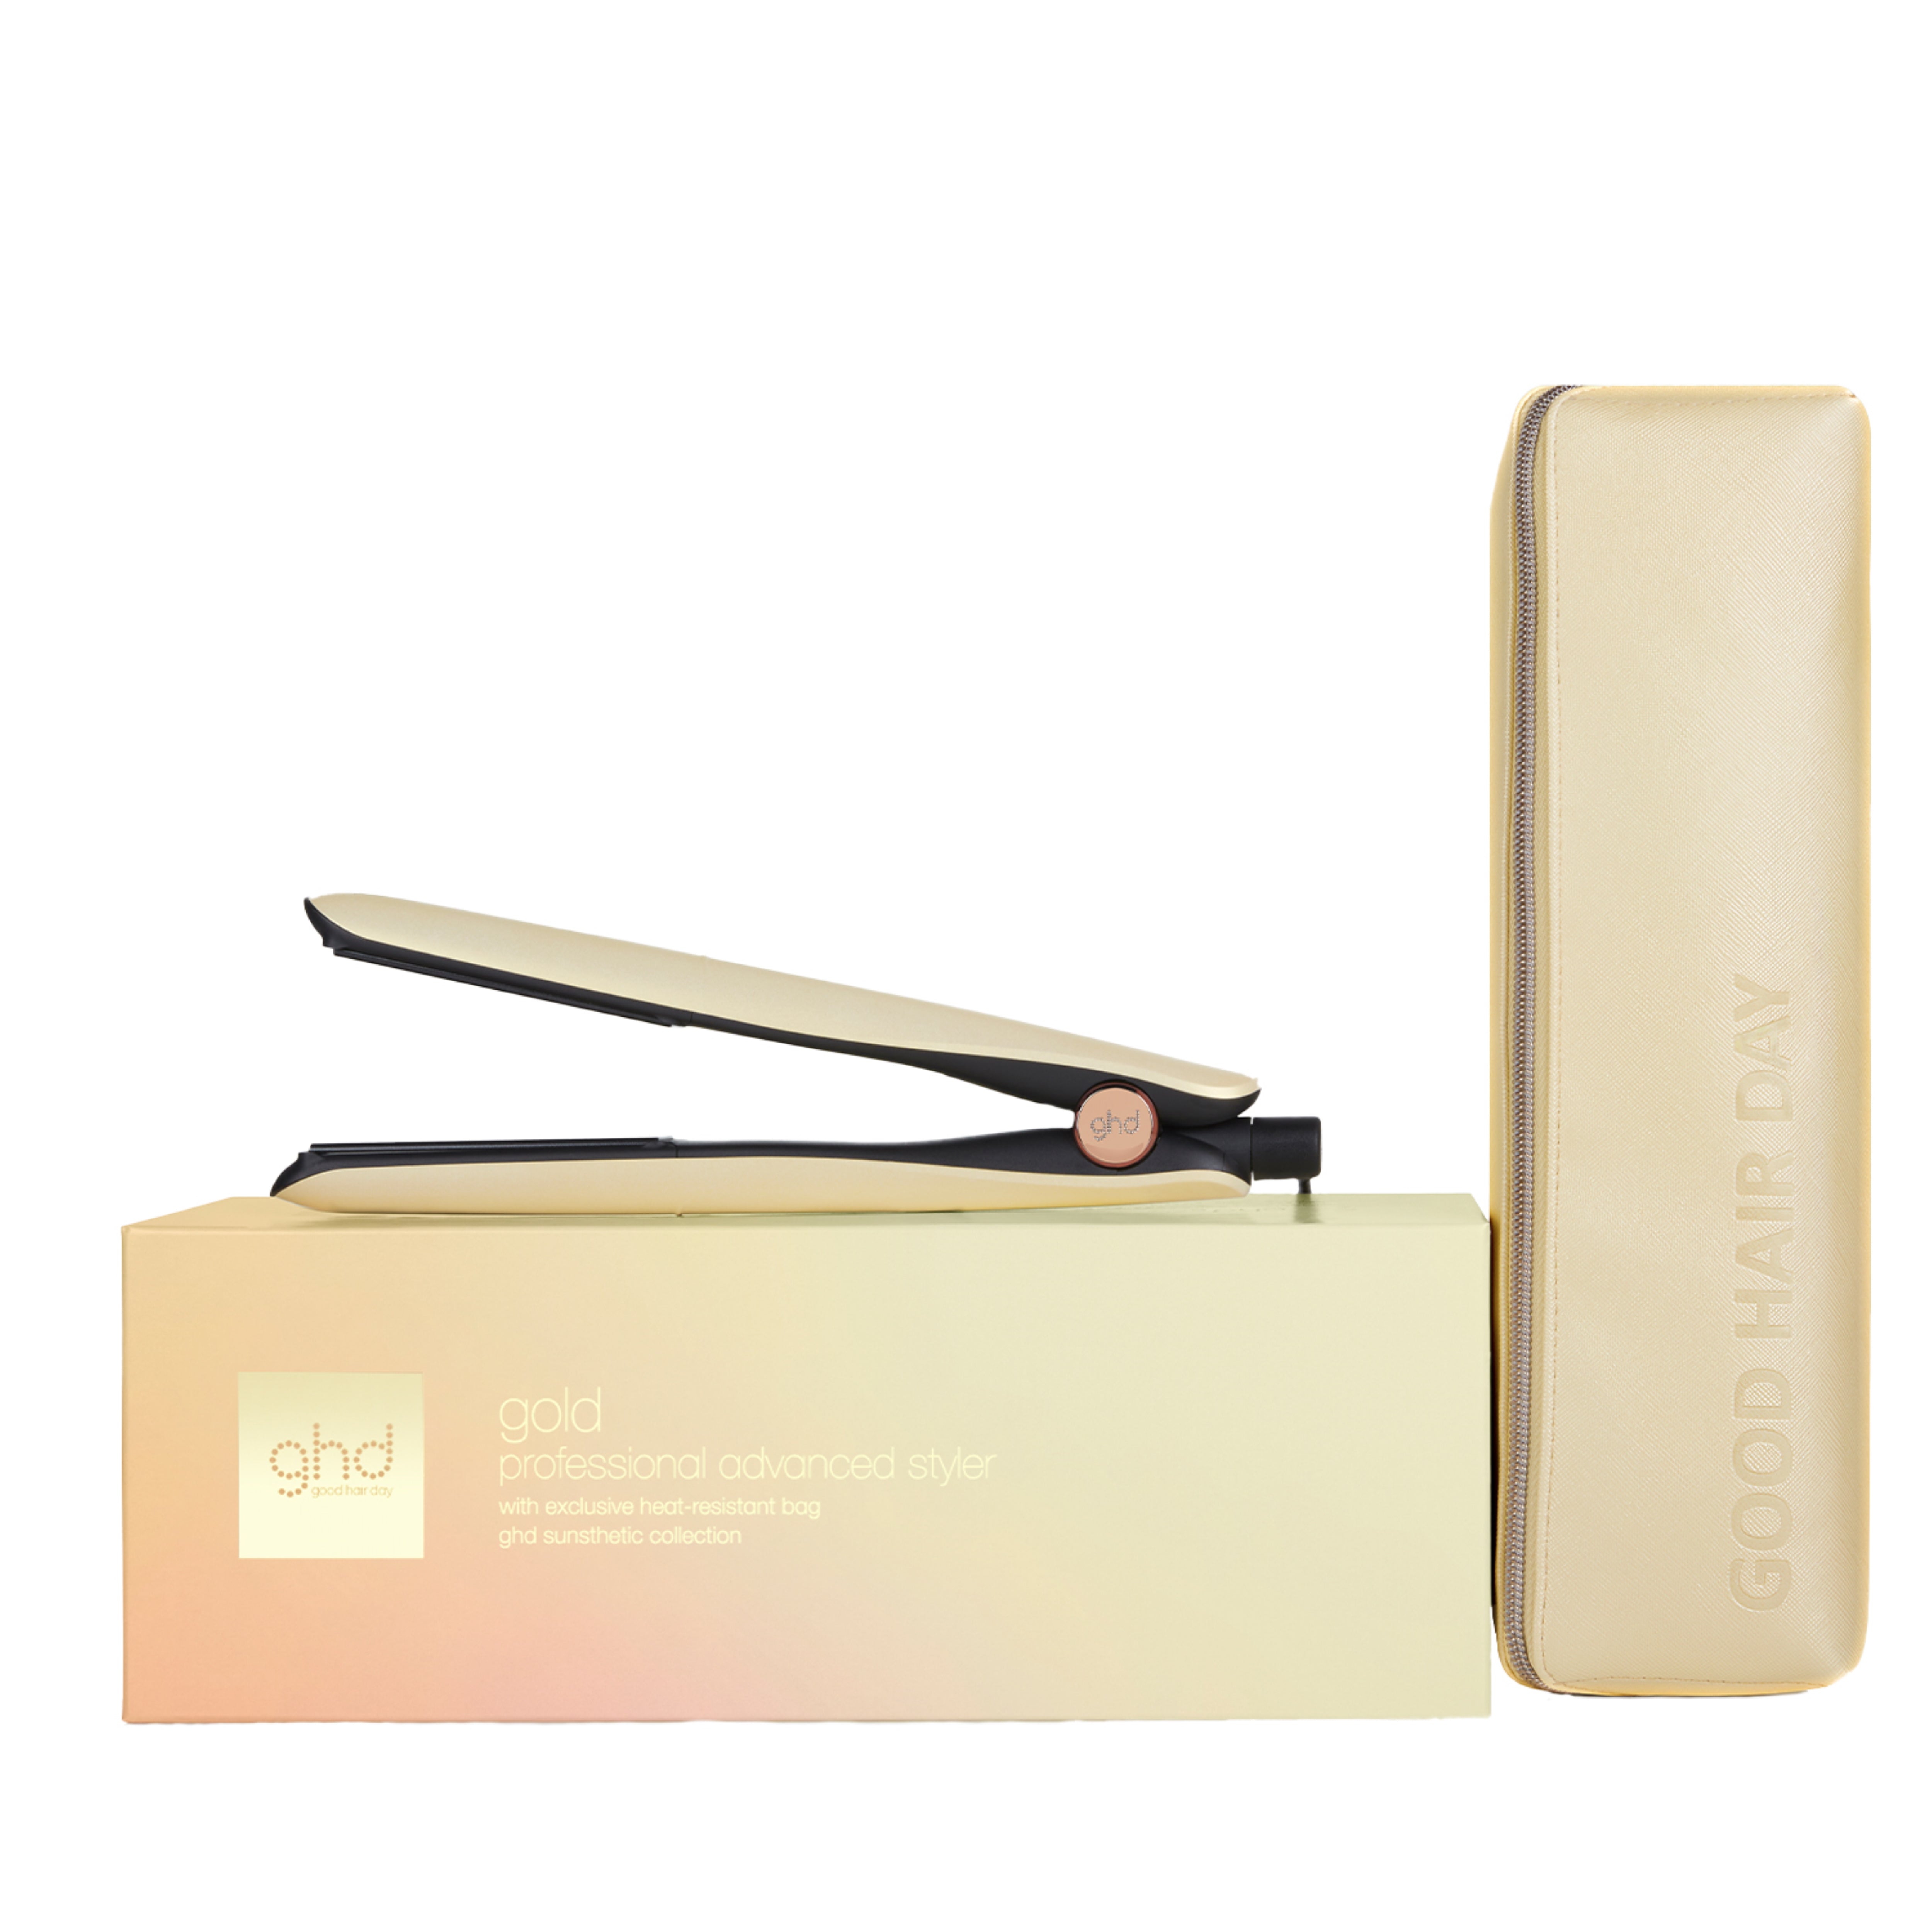 Picture of Sunsthetic Gold Styler in Sunkissed Gold